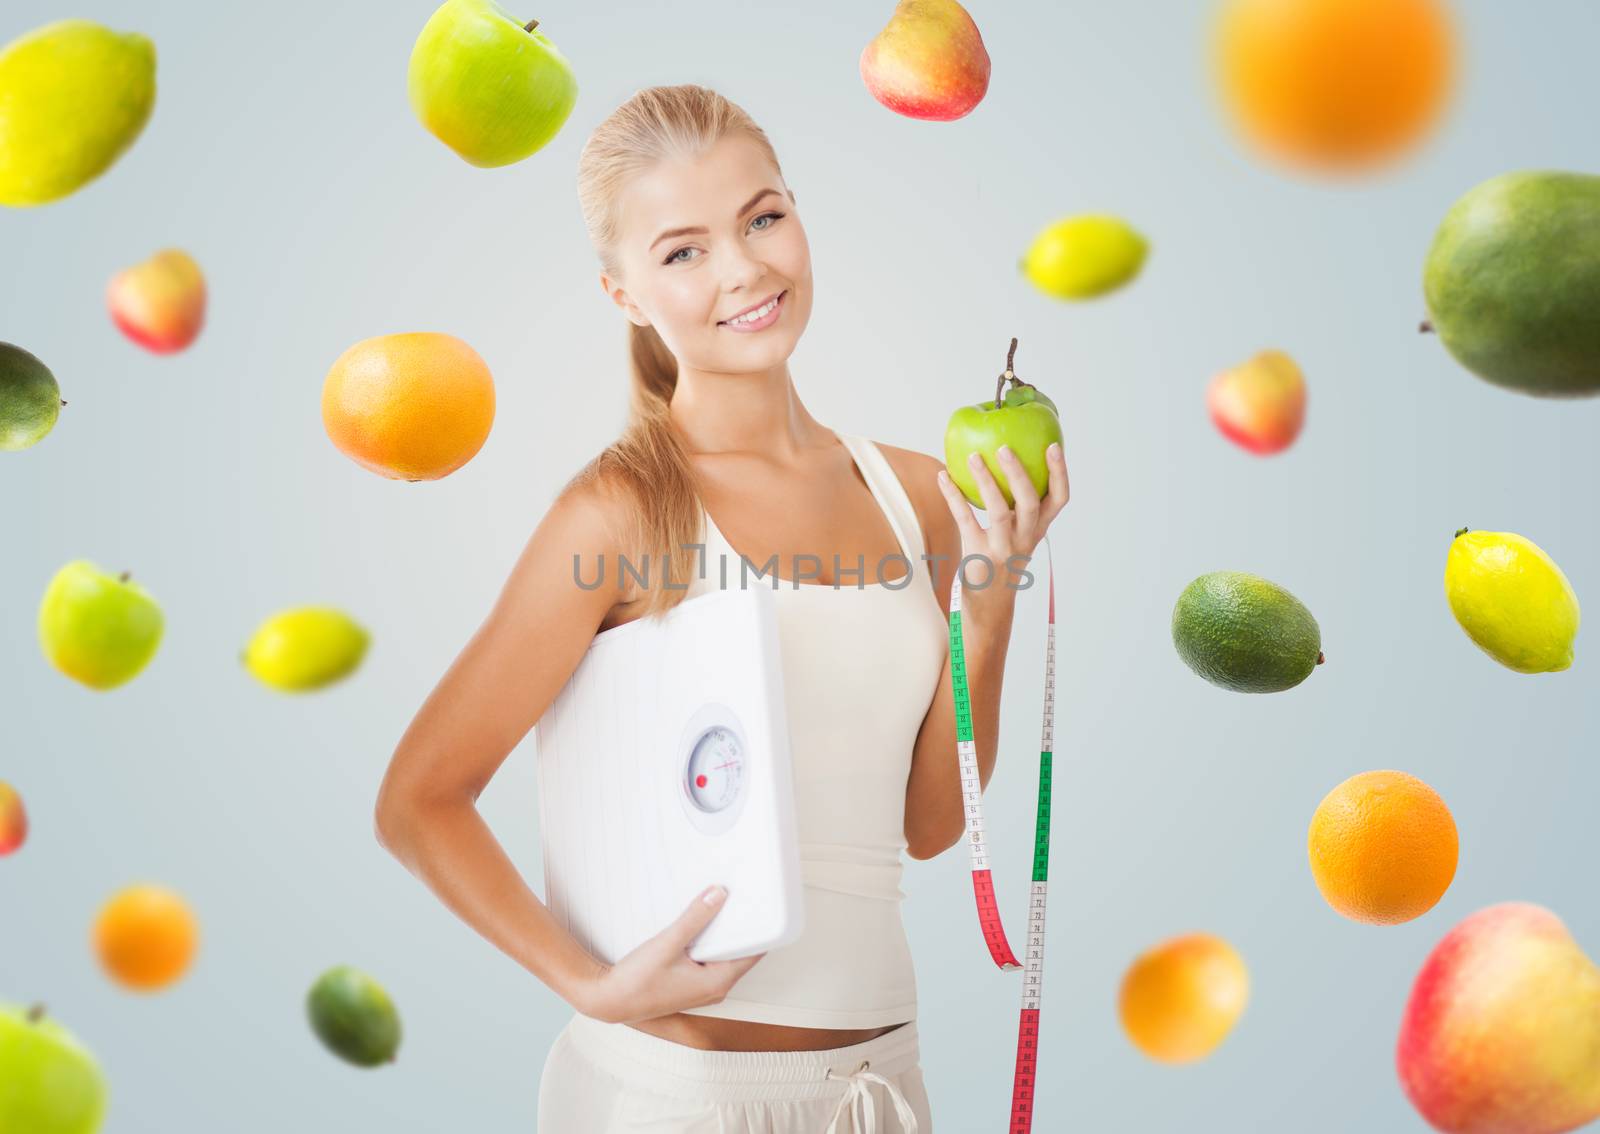 healthy eating, diet, weight control and people concept - happy young woman with scale, green apple and measuring tape over gray background with falling fruits